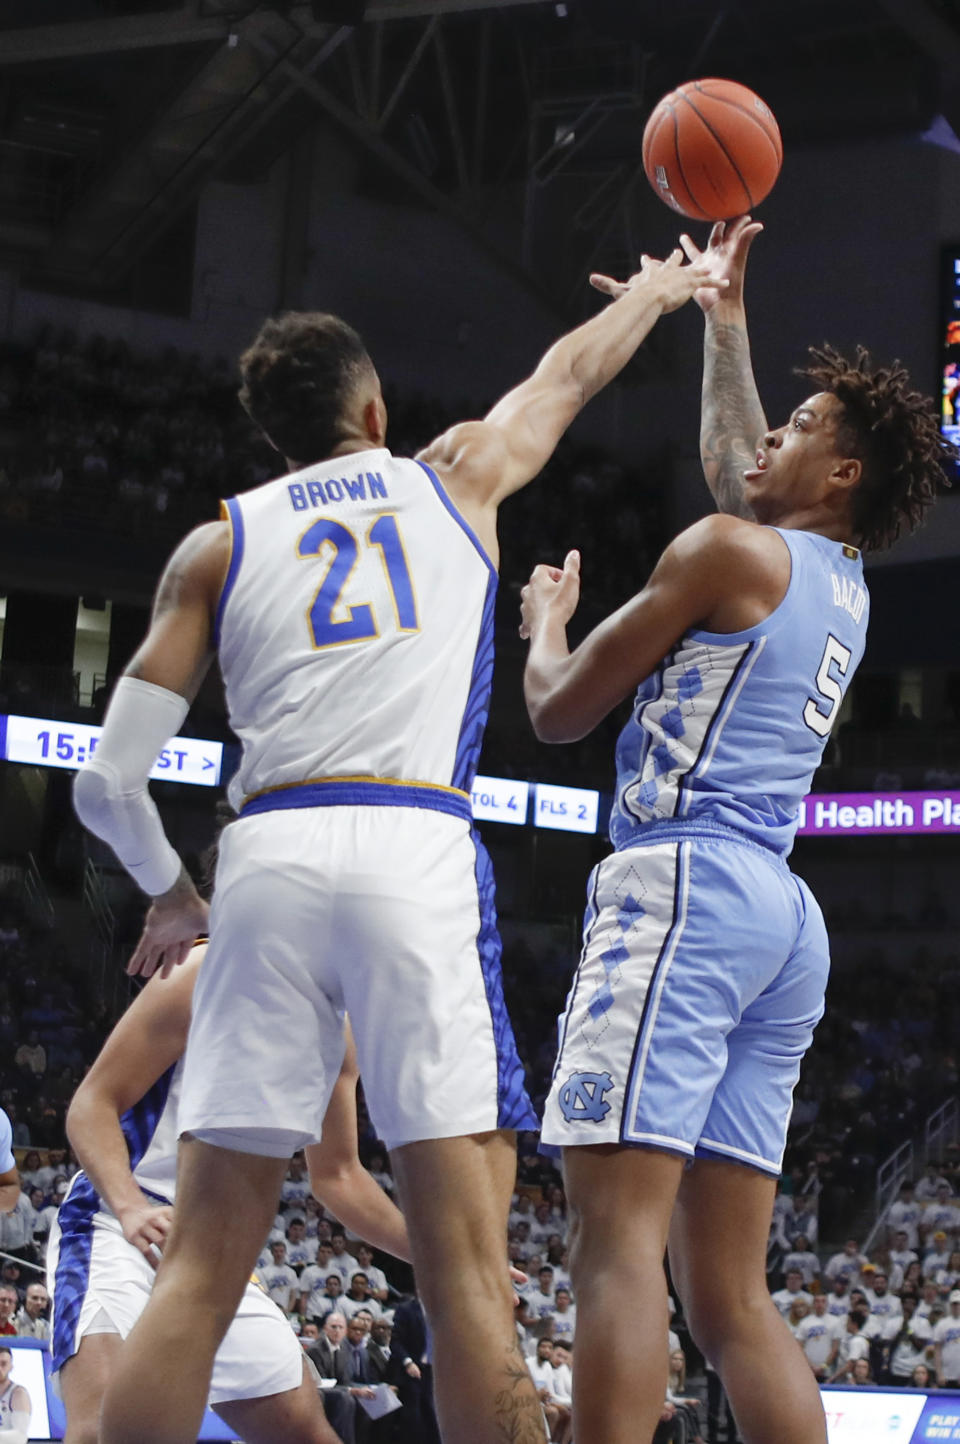 North Carolina's Armando Bacot (5) shoots over Pittsburgh's Terrell Brown (21) during the first half of an NCAA college basketball game, Saturday, Jan. 18, 2020, in Pittsburgh. (AP Photo/Keith Srakocic)